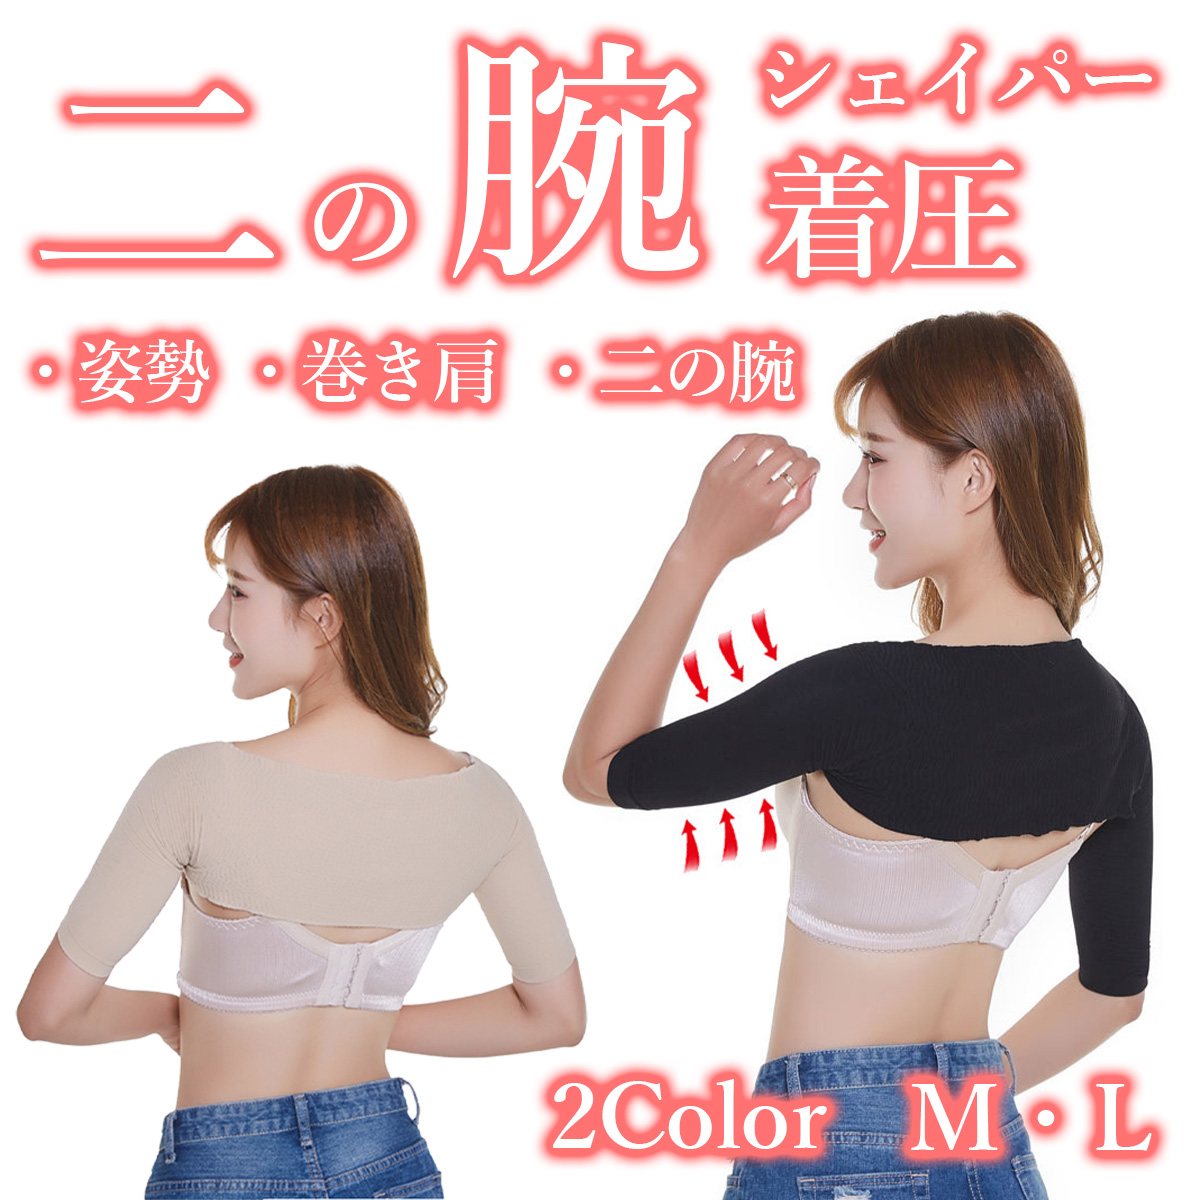  two. arm sheipa- supporter two. arm put on pressure summer discount tighten two. arm .. diet goods two. arm cover cat . to coil shoulder effect posture correction chilling inner 